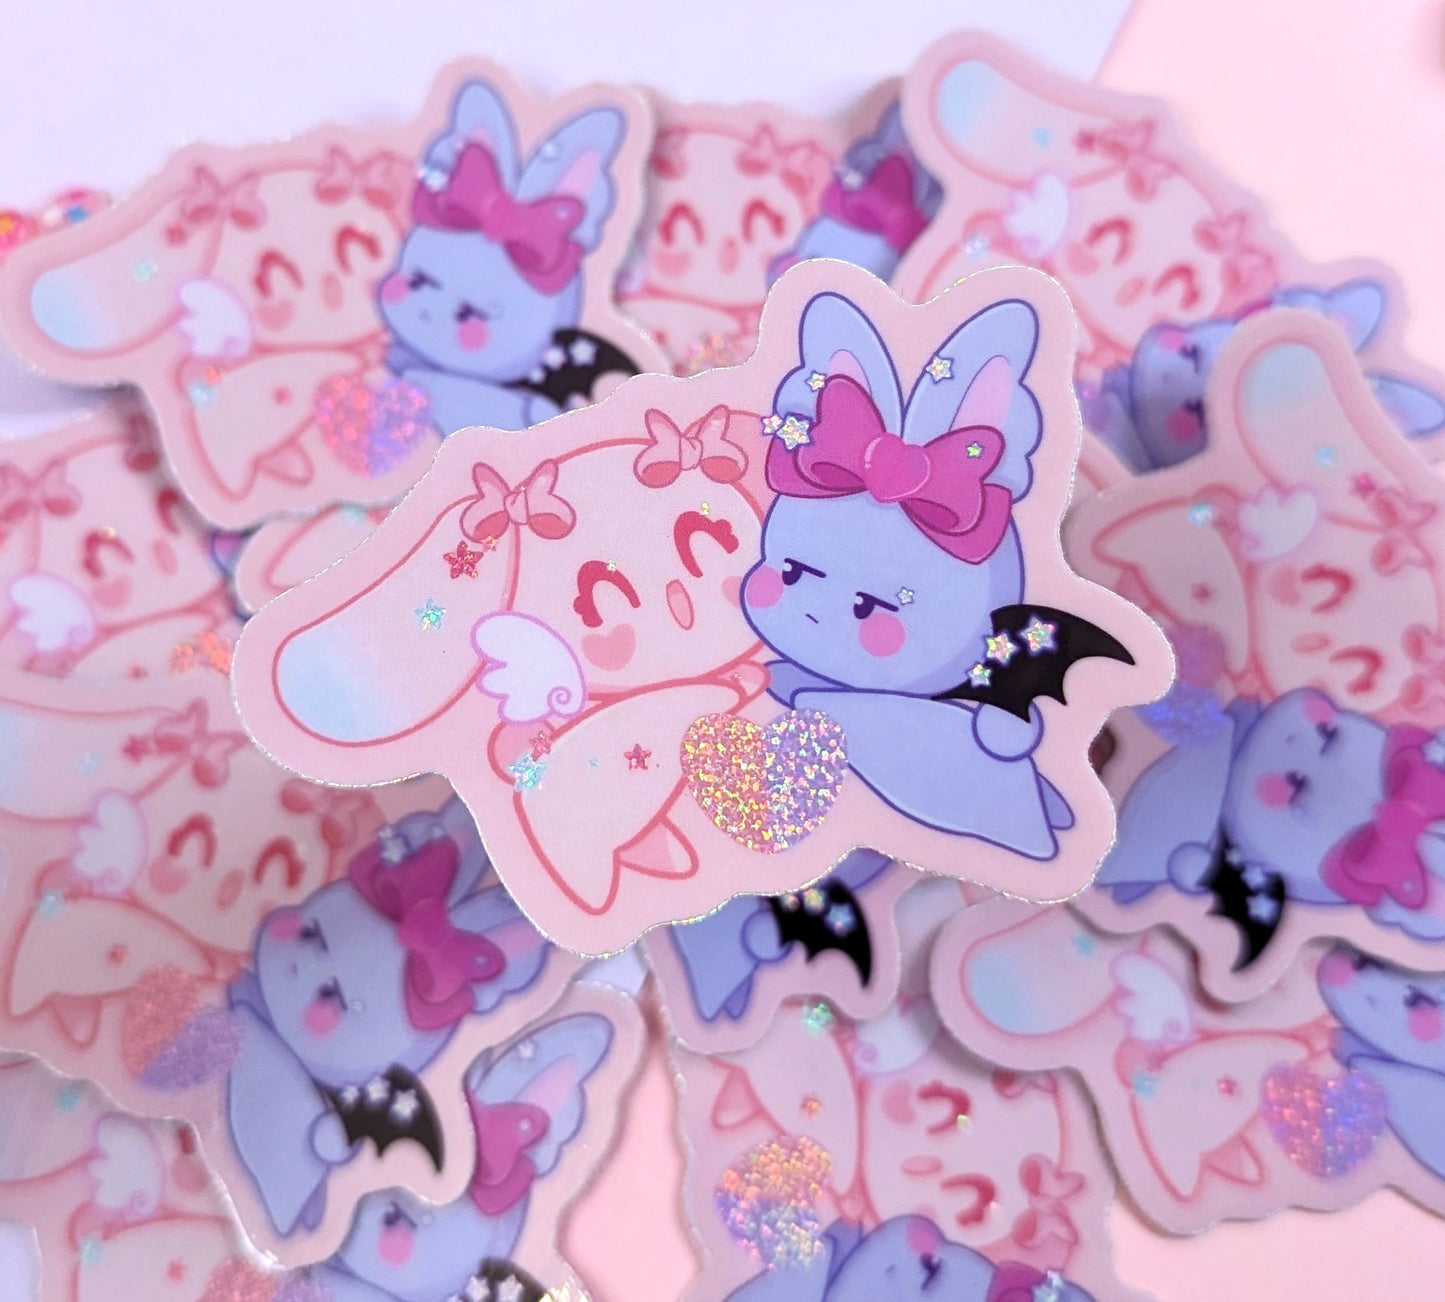 Angel and Devil Bunny Stickers